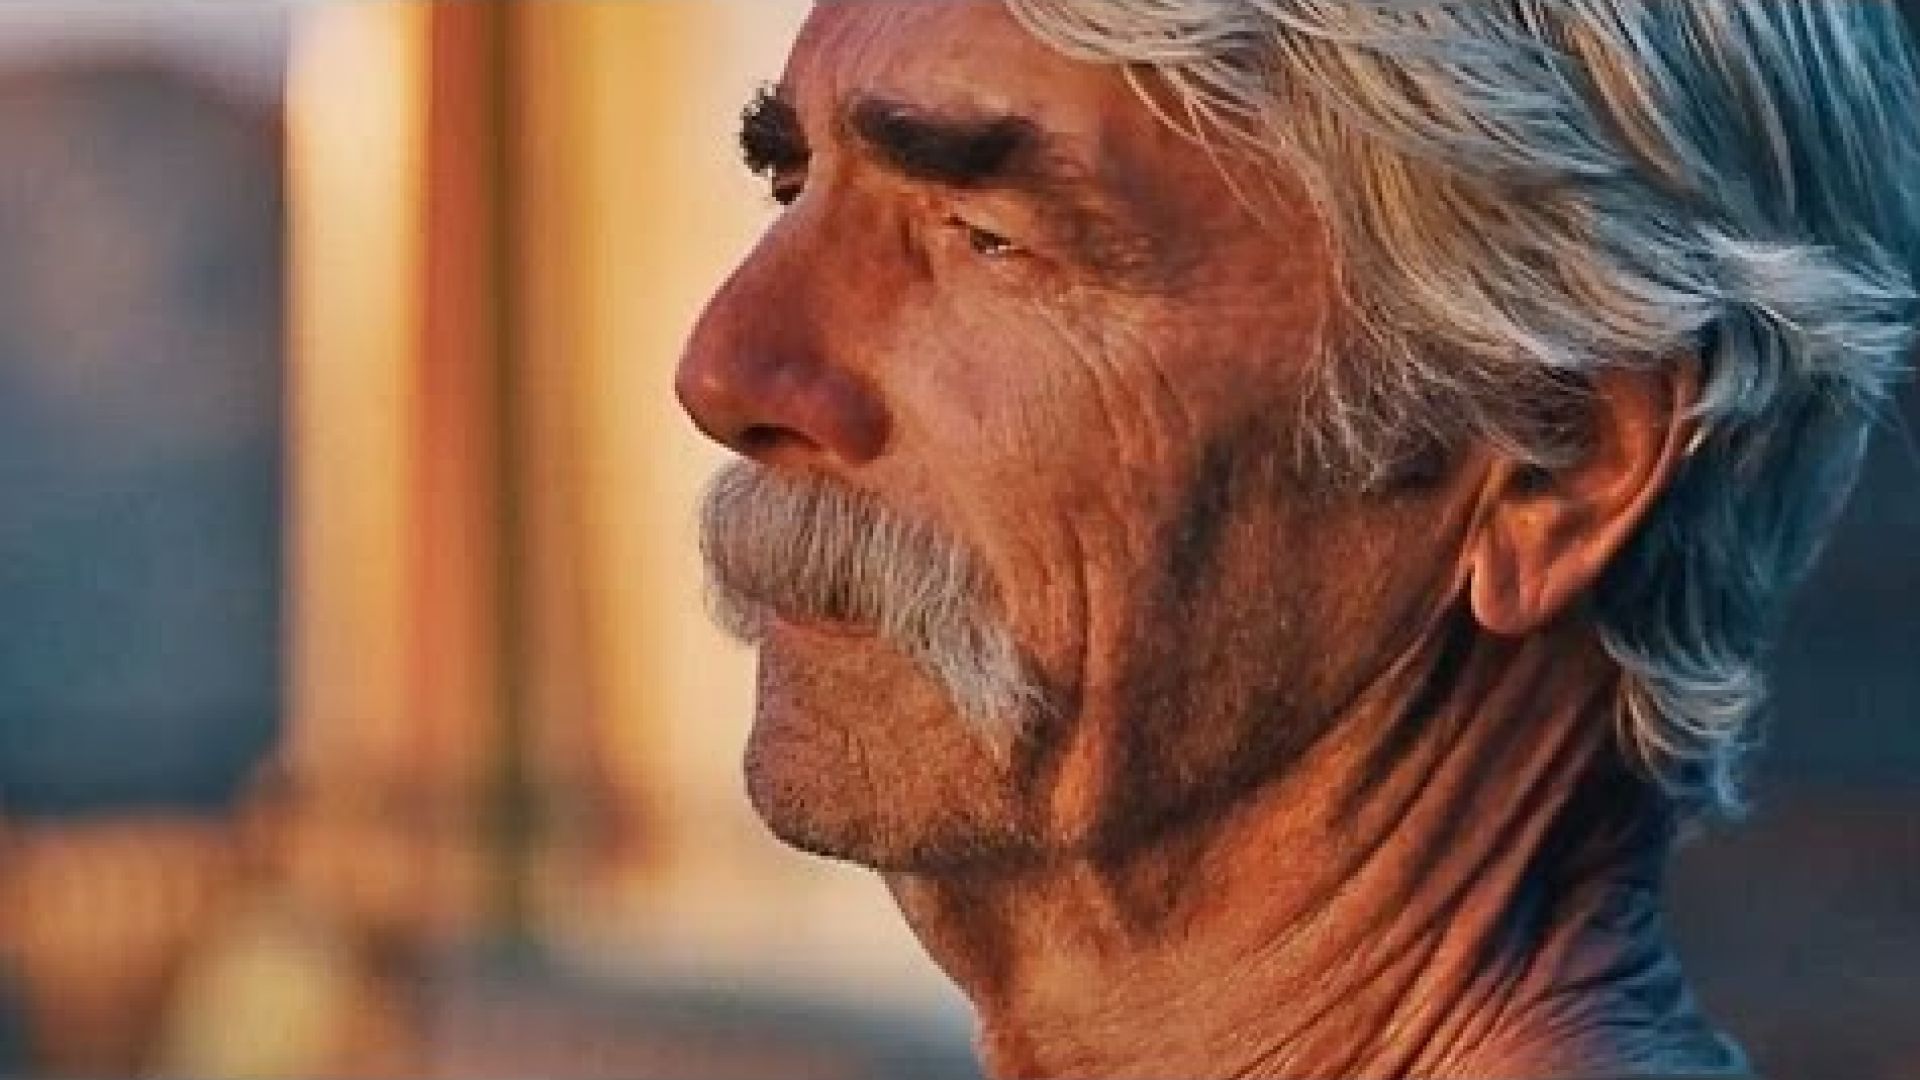 From Sundance, check out Sam Elliot as an aging actor in &#039;Th